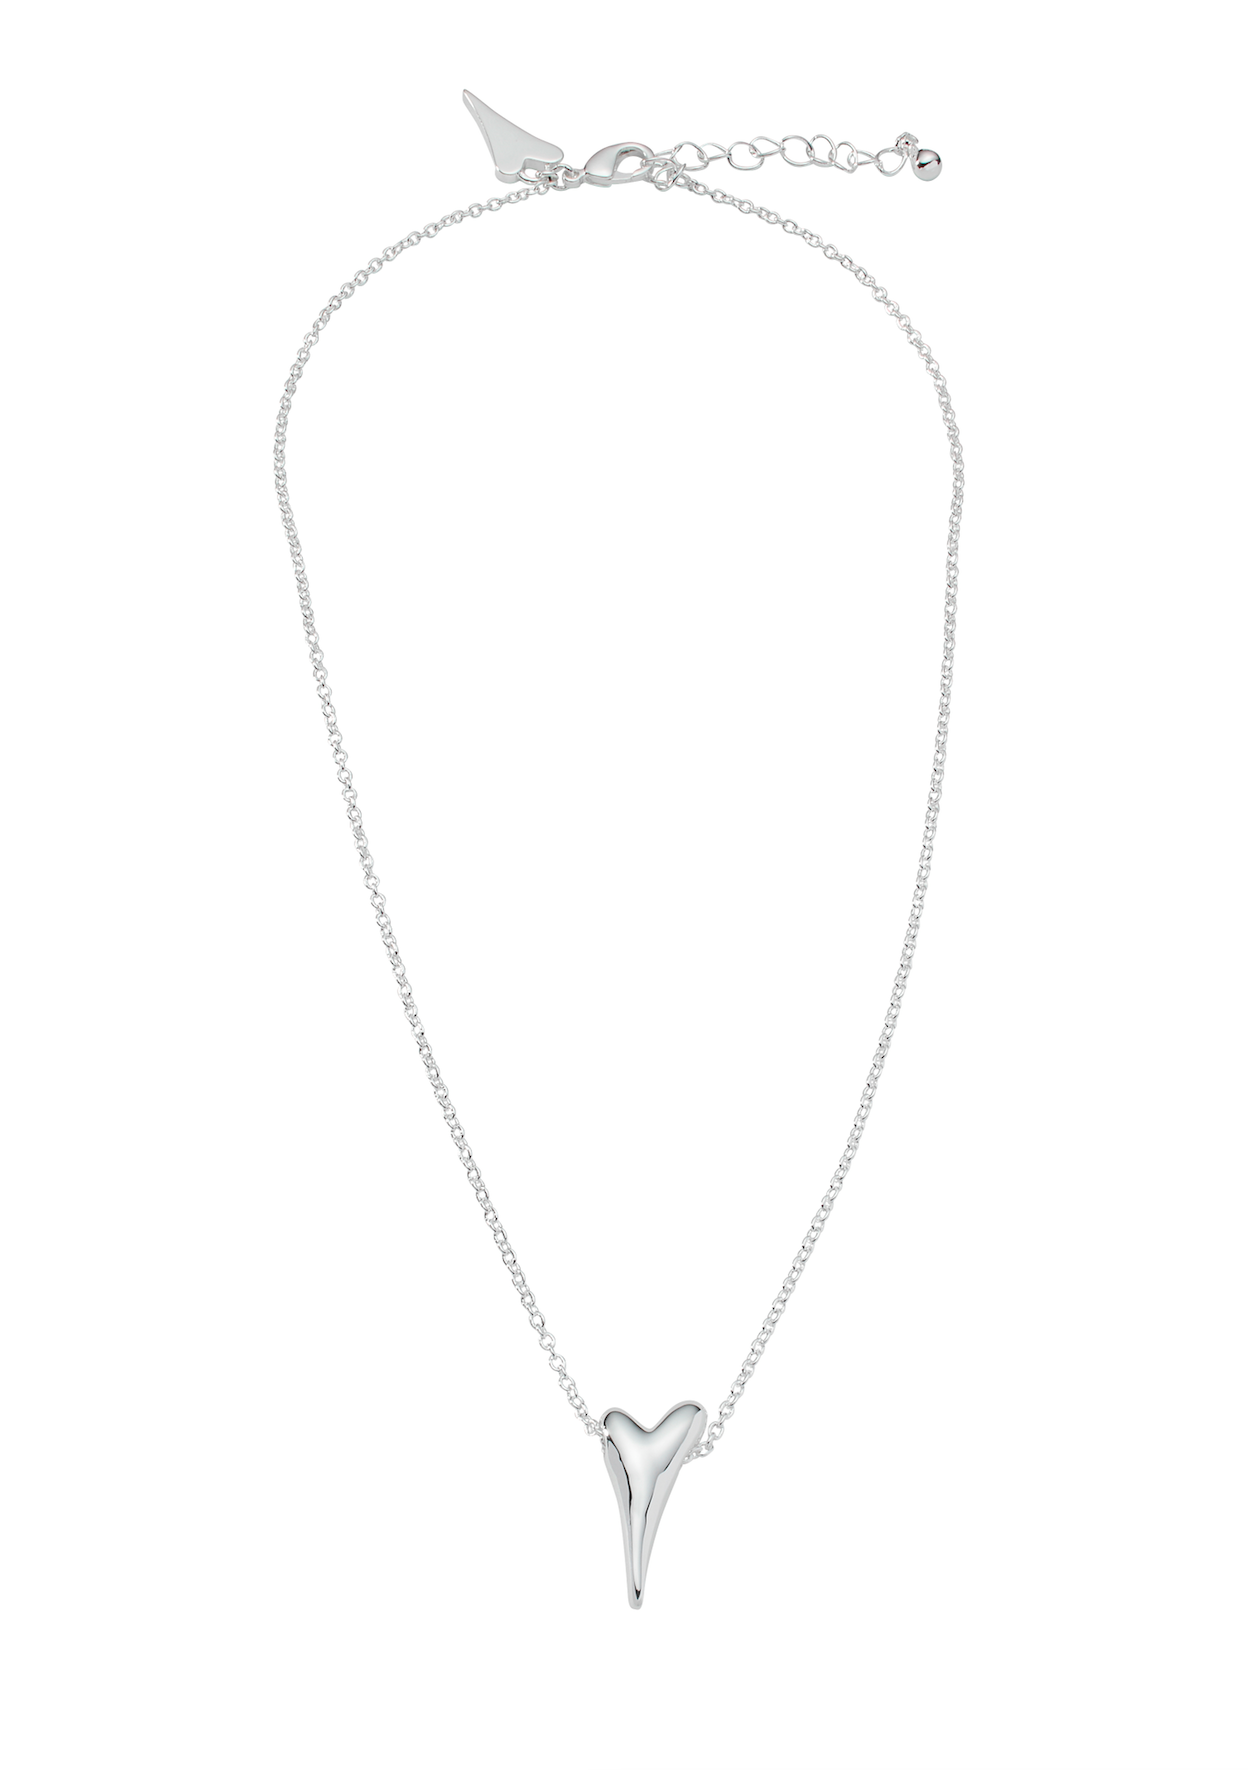 Necklace thin silver chain with a small bubble heart pendant